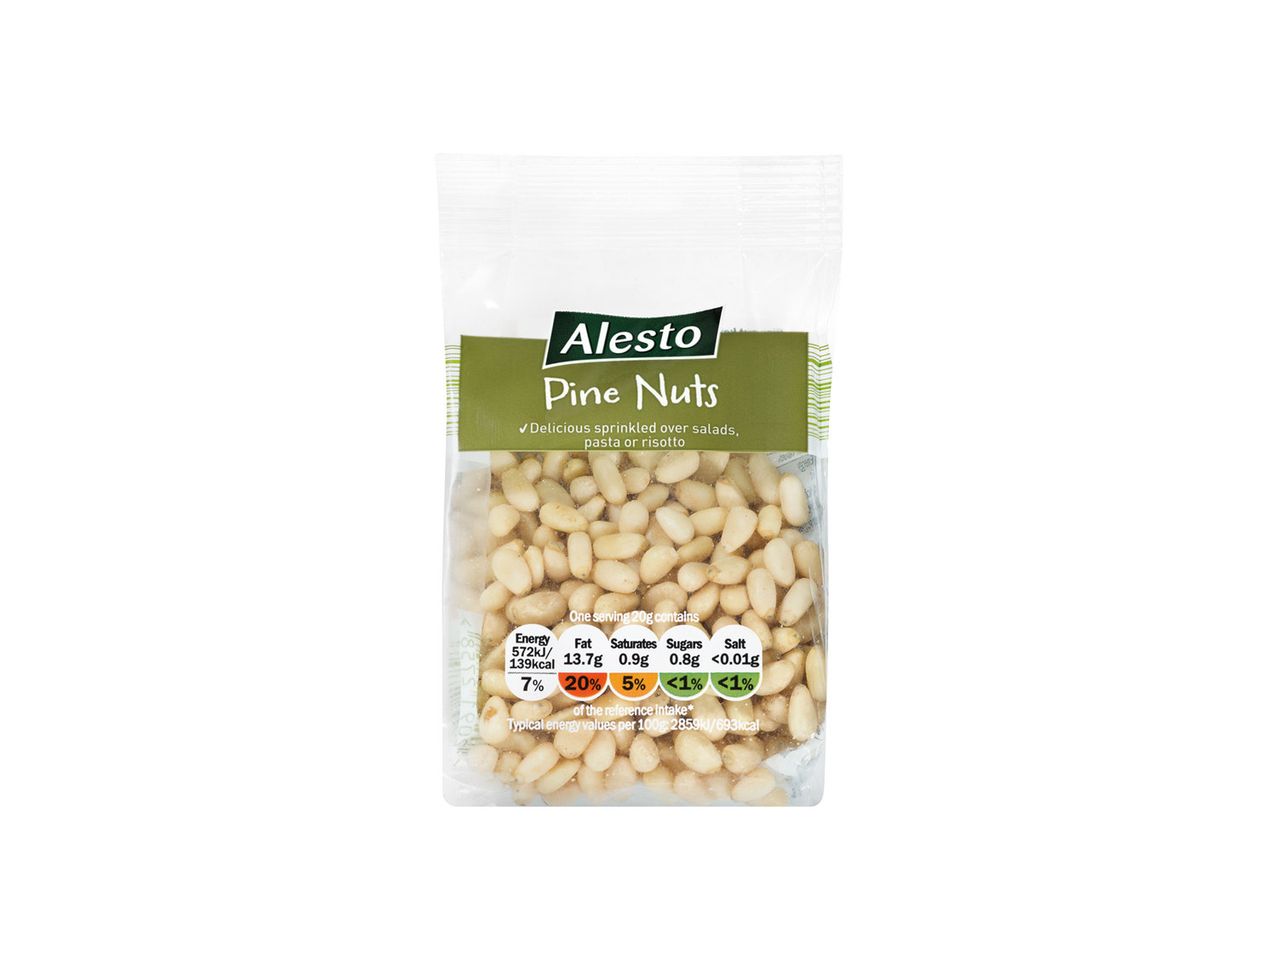 Go to full screen view: Alesto Pine Nuts - Image 1